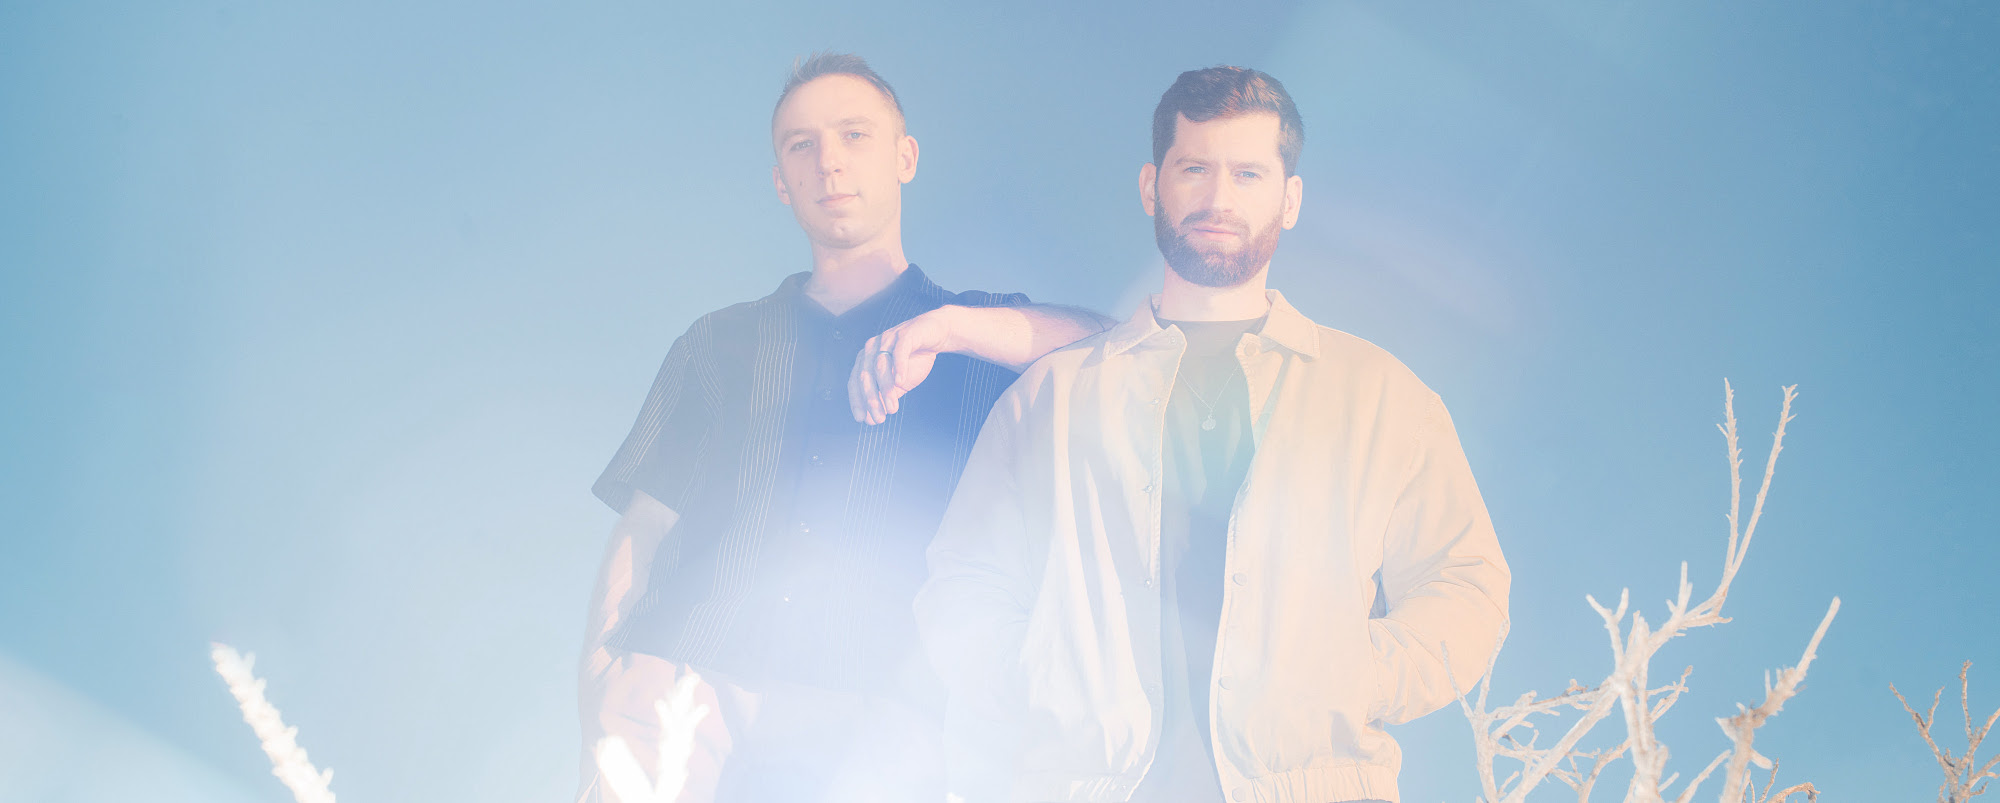 ODESZA Releases Latest LP, ‘The Last Goodbye’